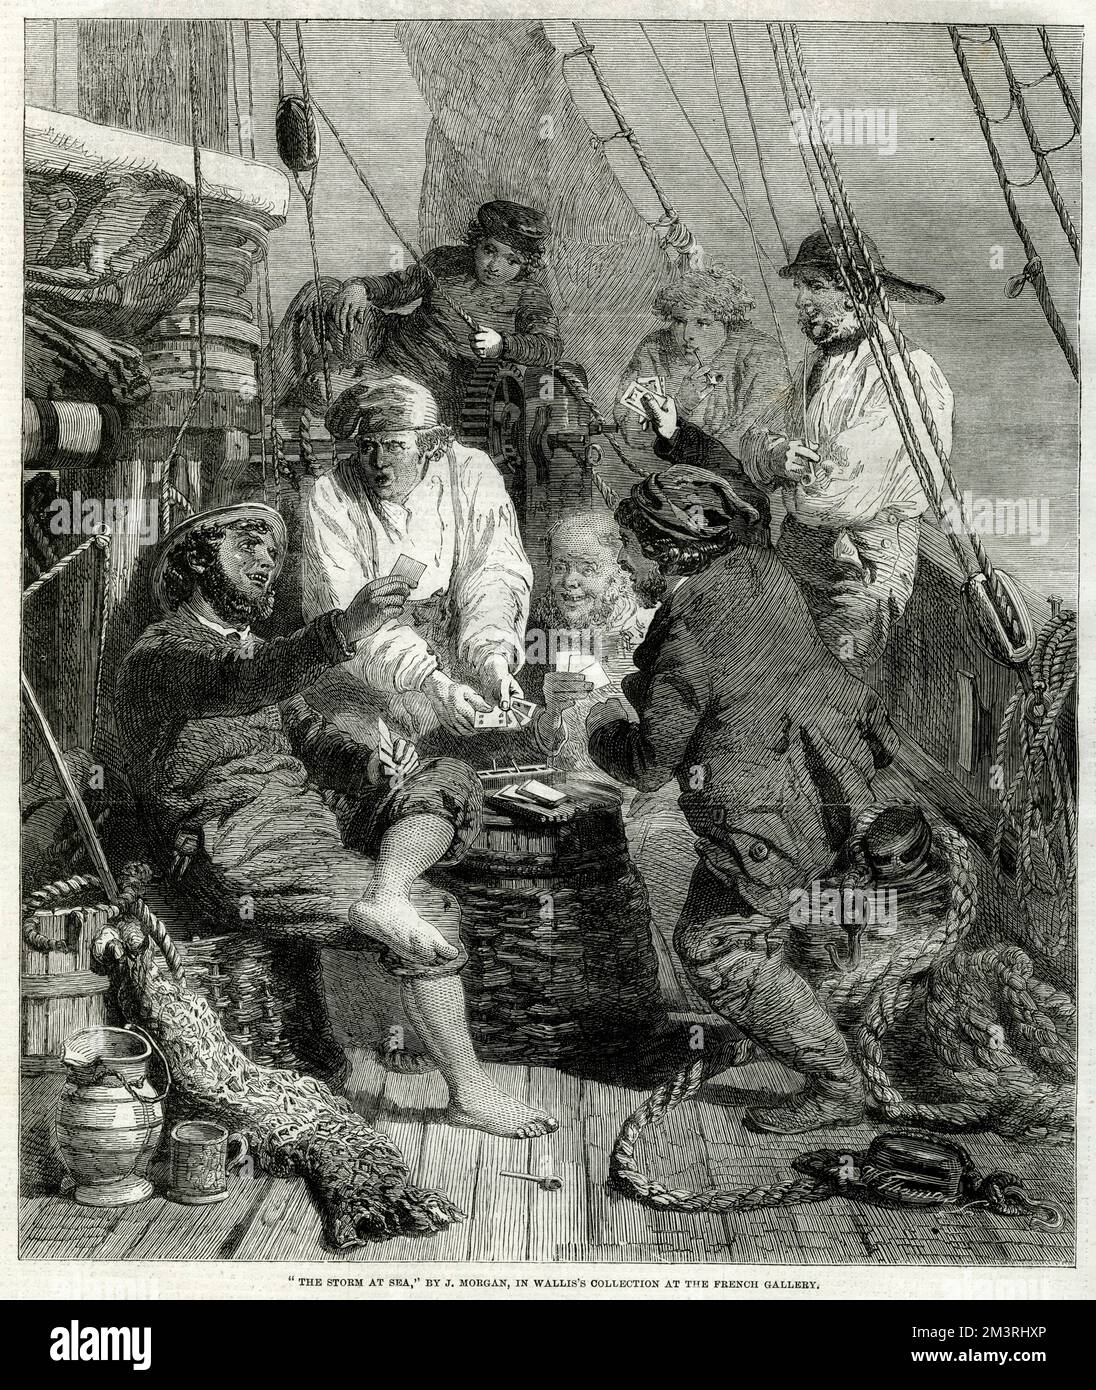 Some rough-looking sailors playing cards on their trading vessel. The losers vociferate violently, while the winners break out into a broad grin. The skipper, who stands on one side, is mightily amused, while to boys apparently not understanding much of the game, look on with a vacant stare of curiosity.     Date: 1861 Stock Photo